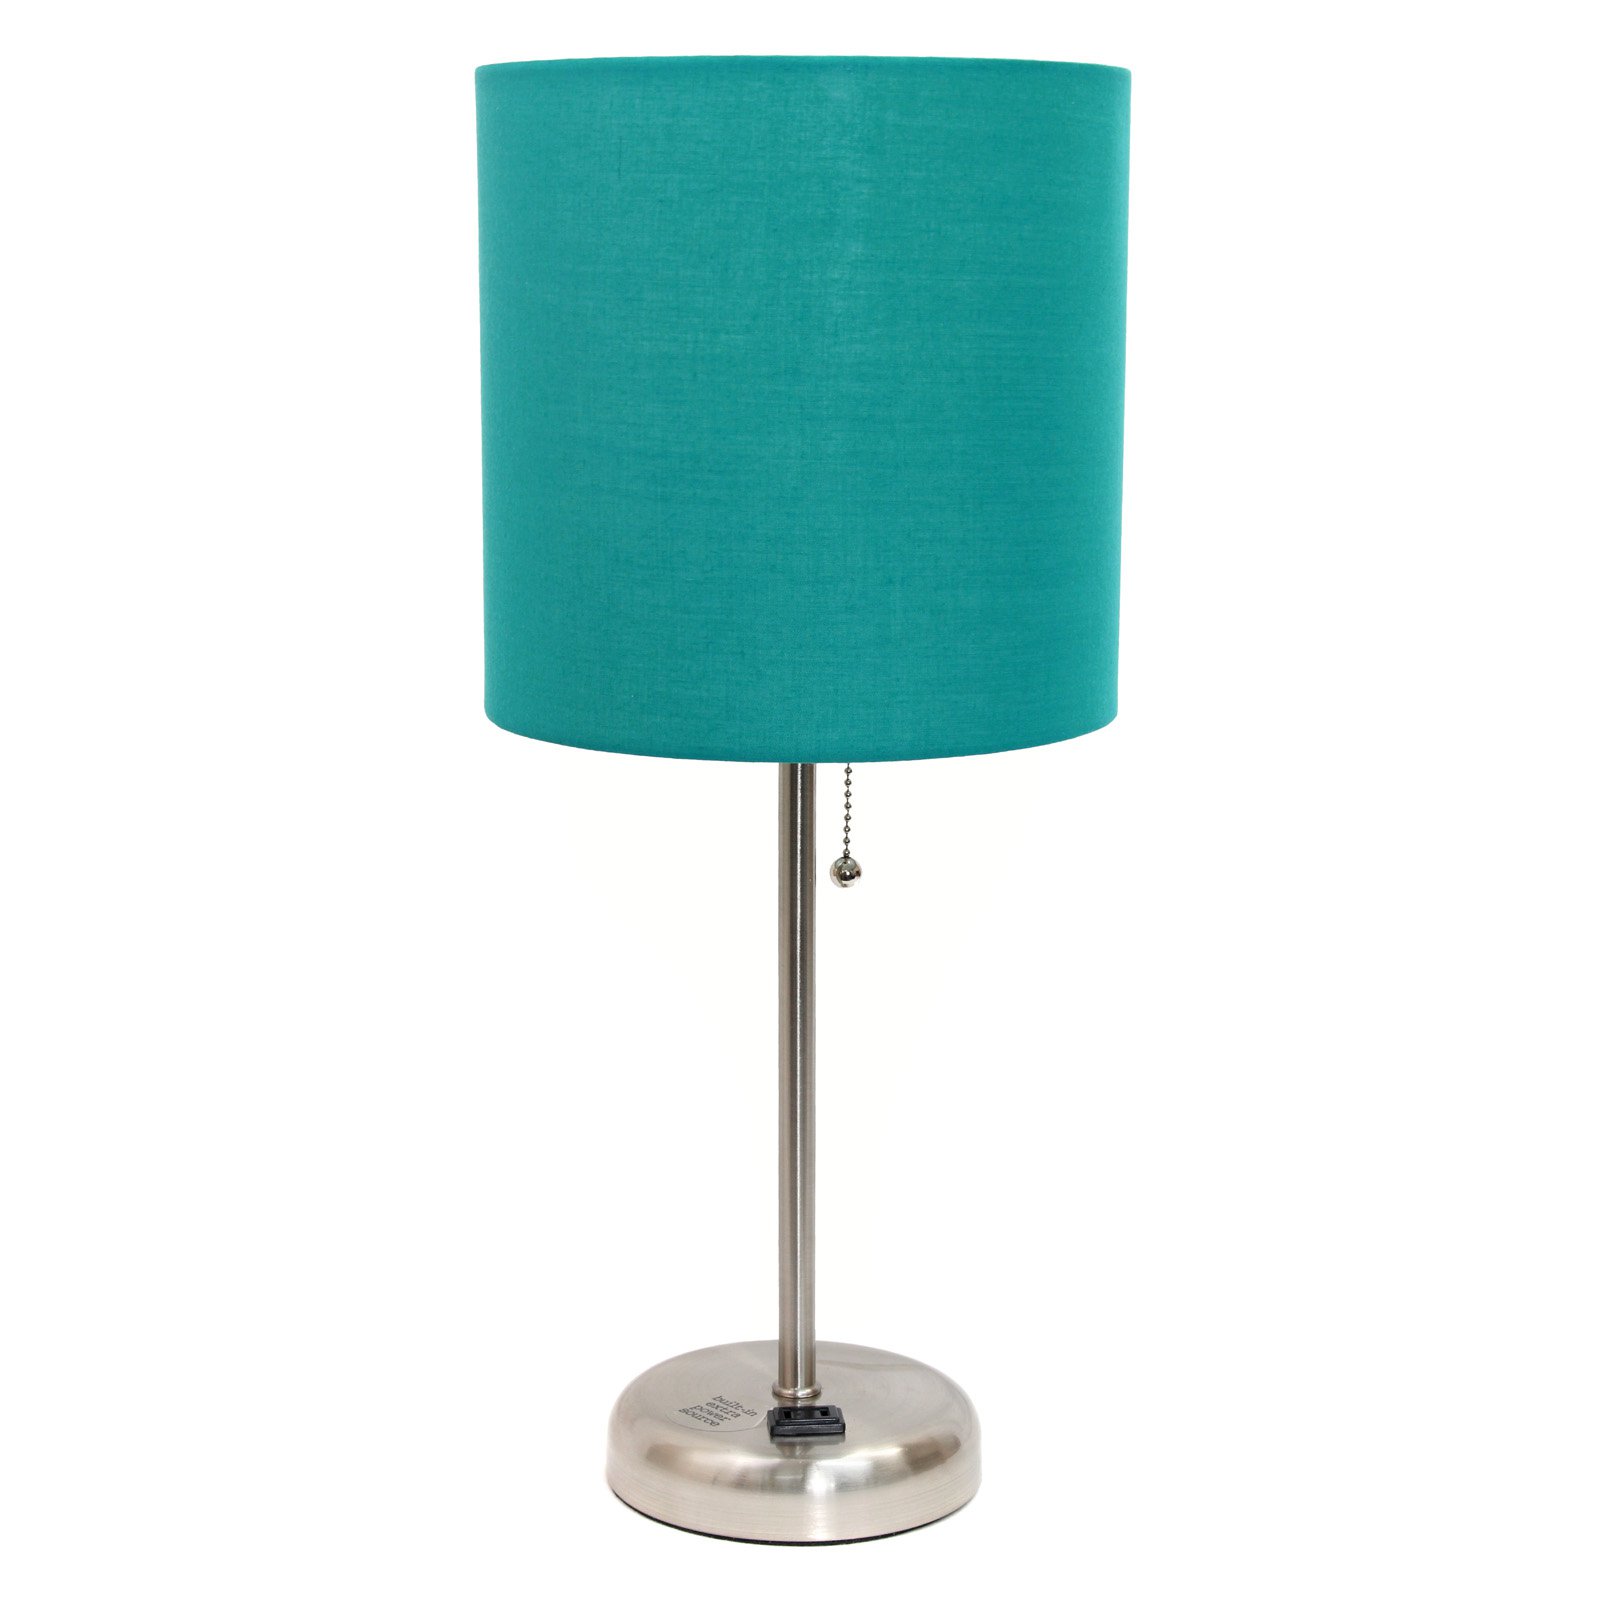 LimeLights Stick Lamp with Charging Outlet and Fabric Shade - Brushed Steel - image 3 of 11